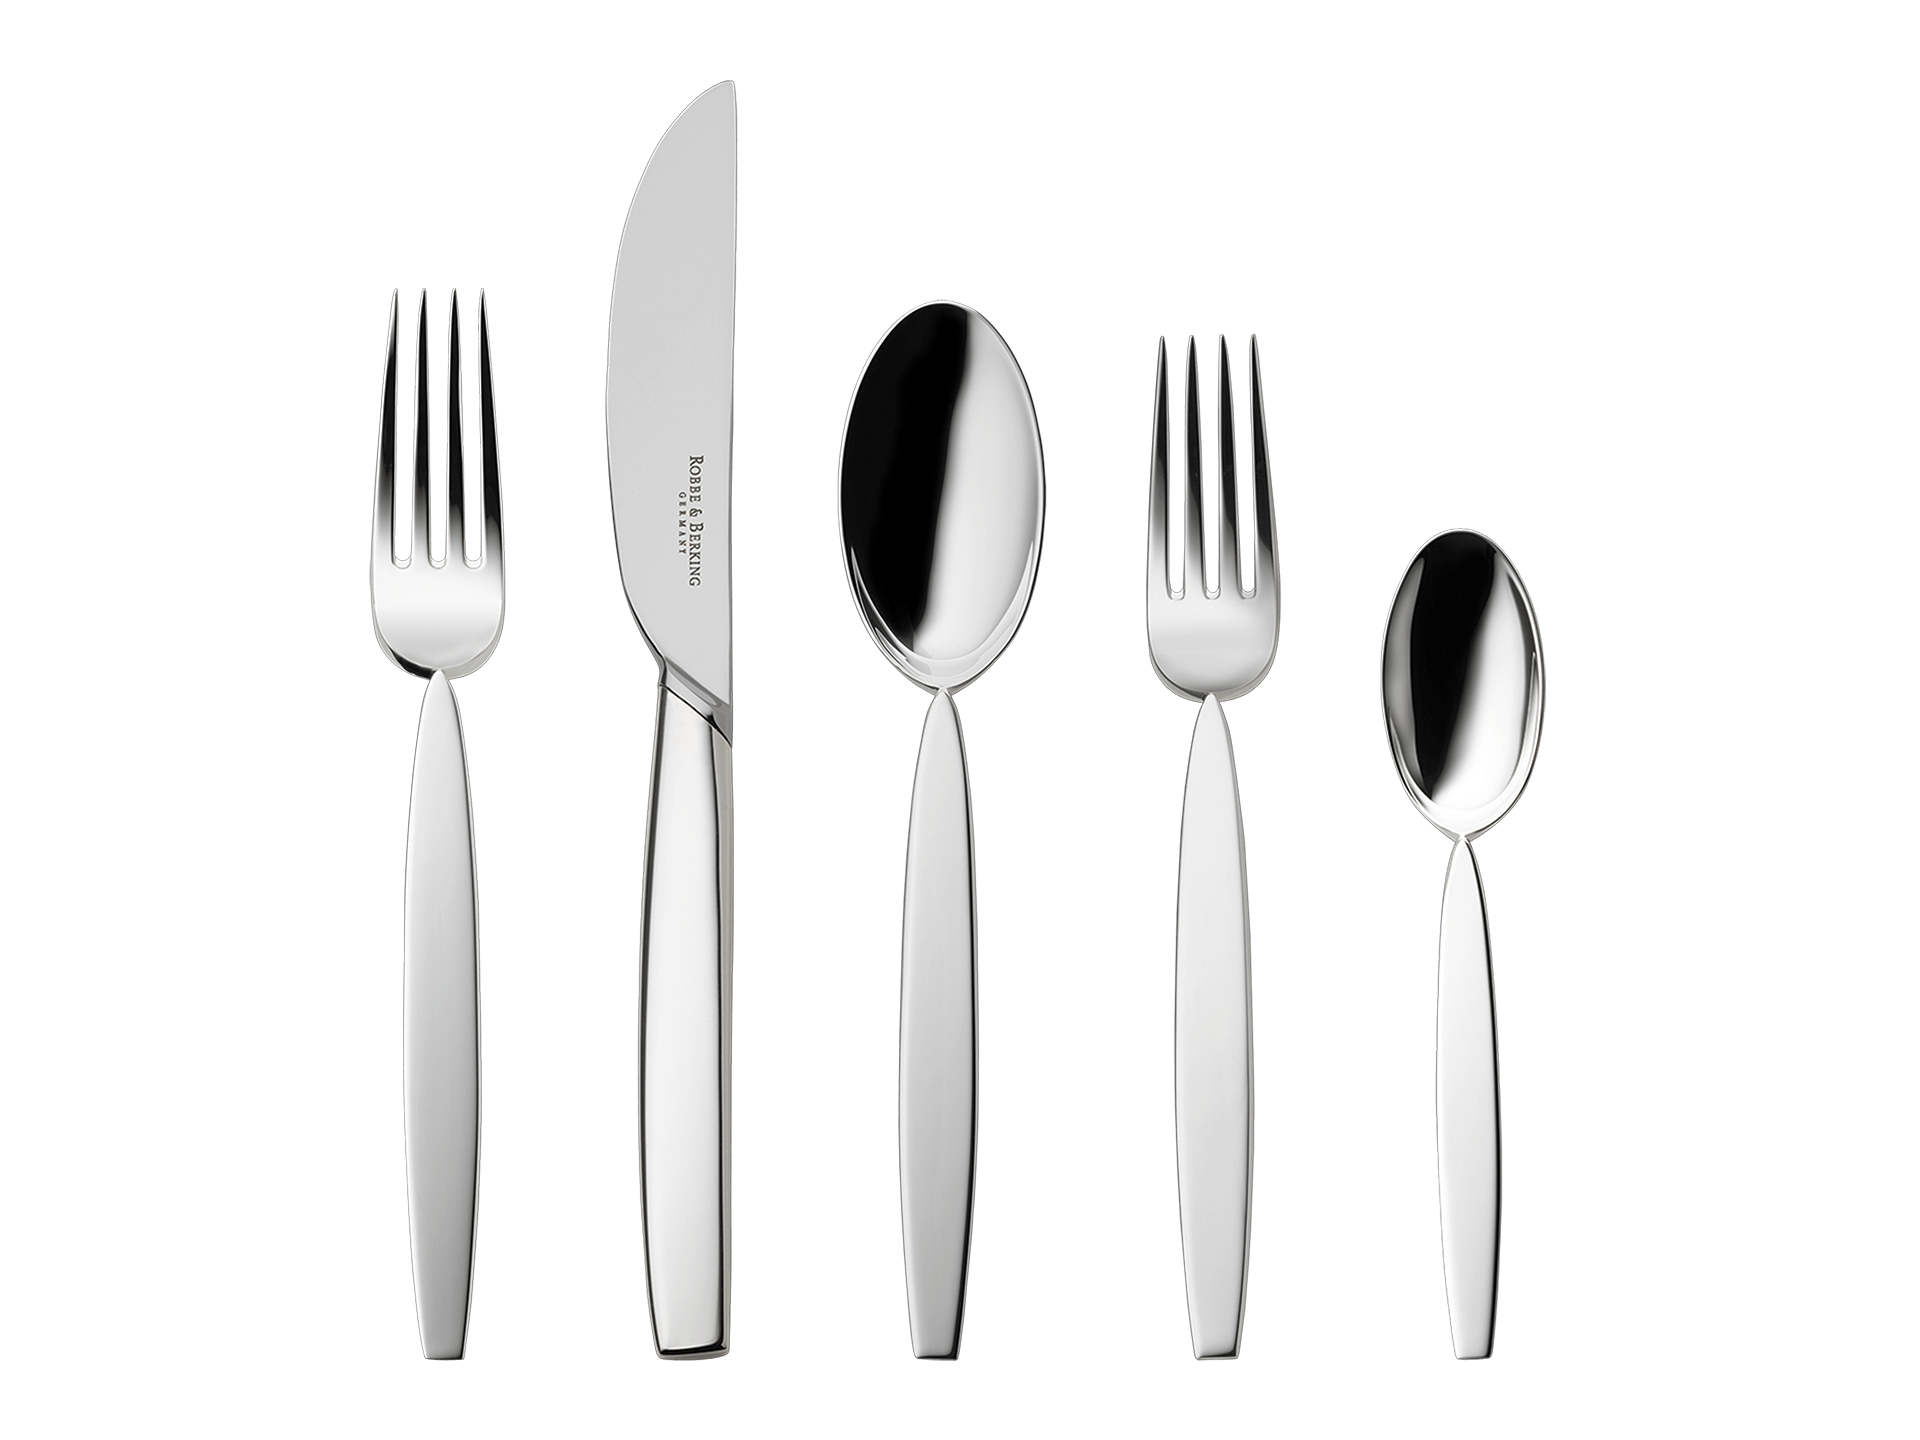 12" 5-piece place setting (925 Sterling Silver)